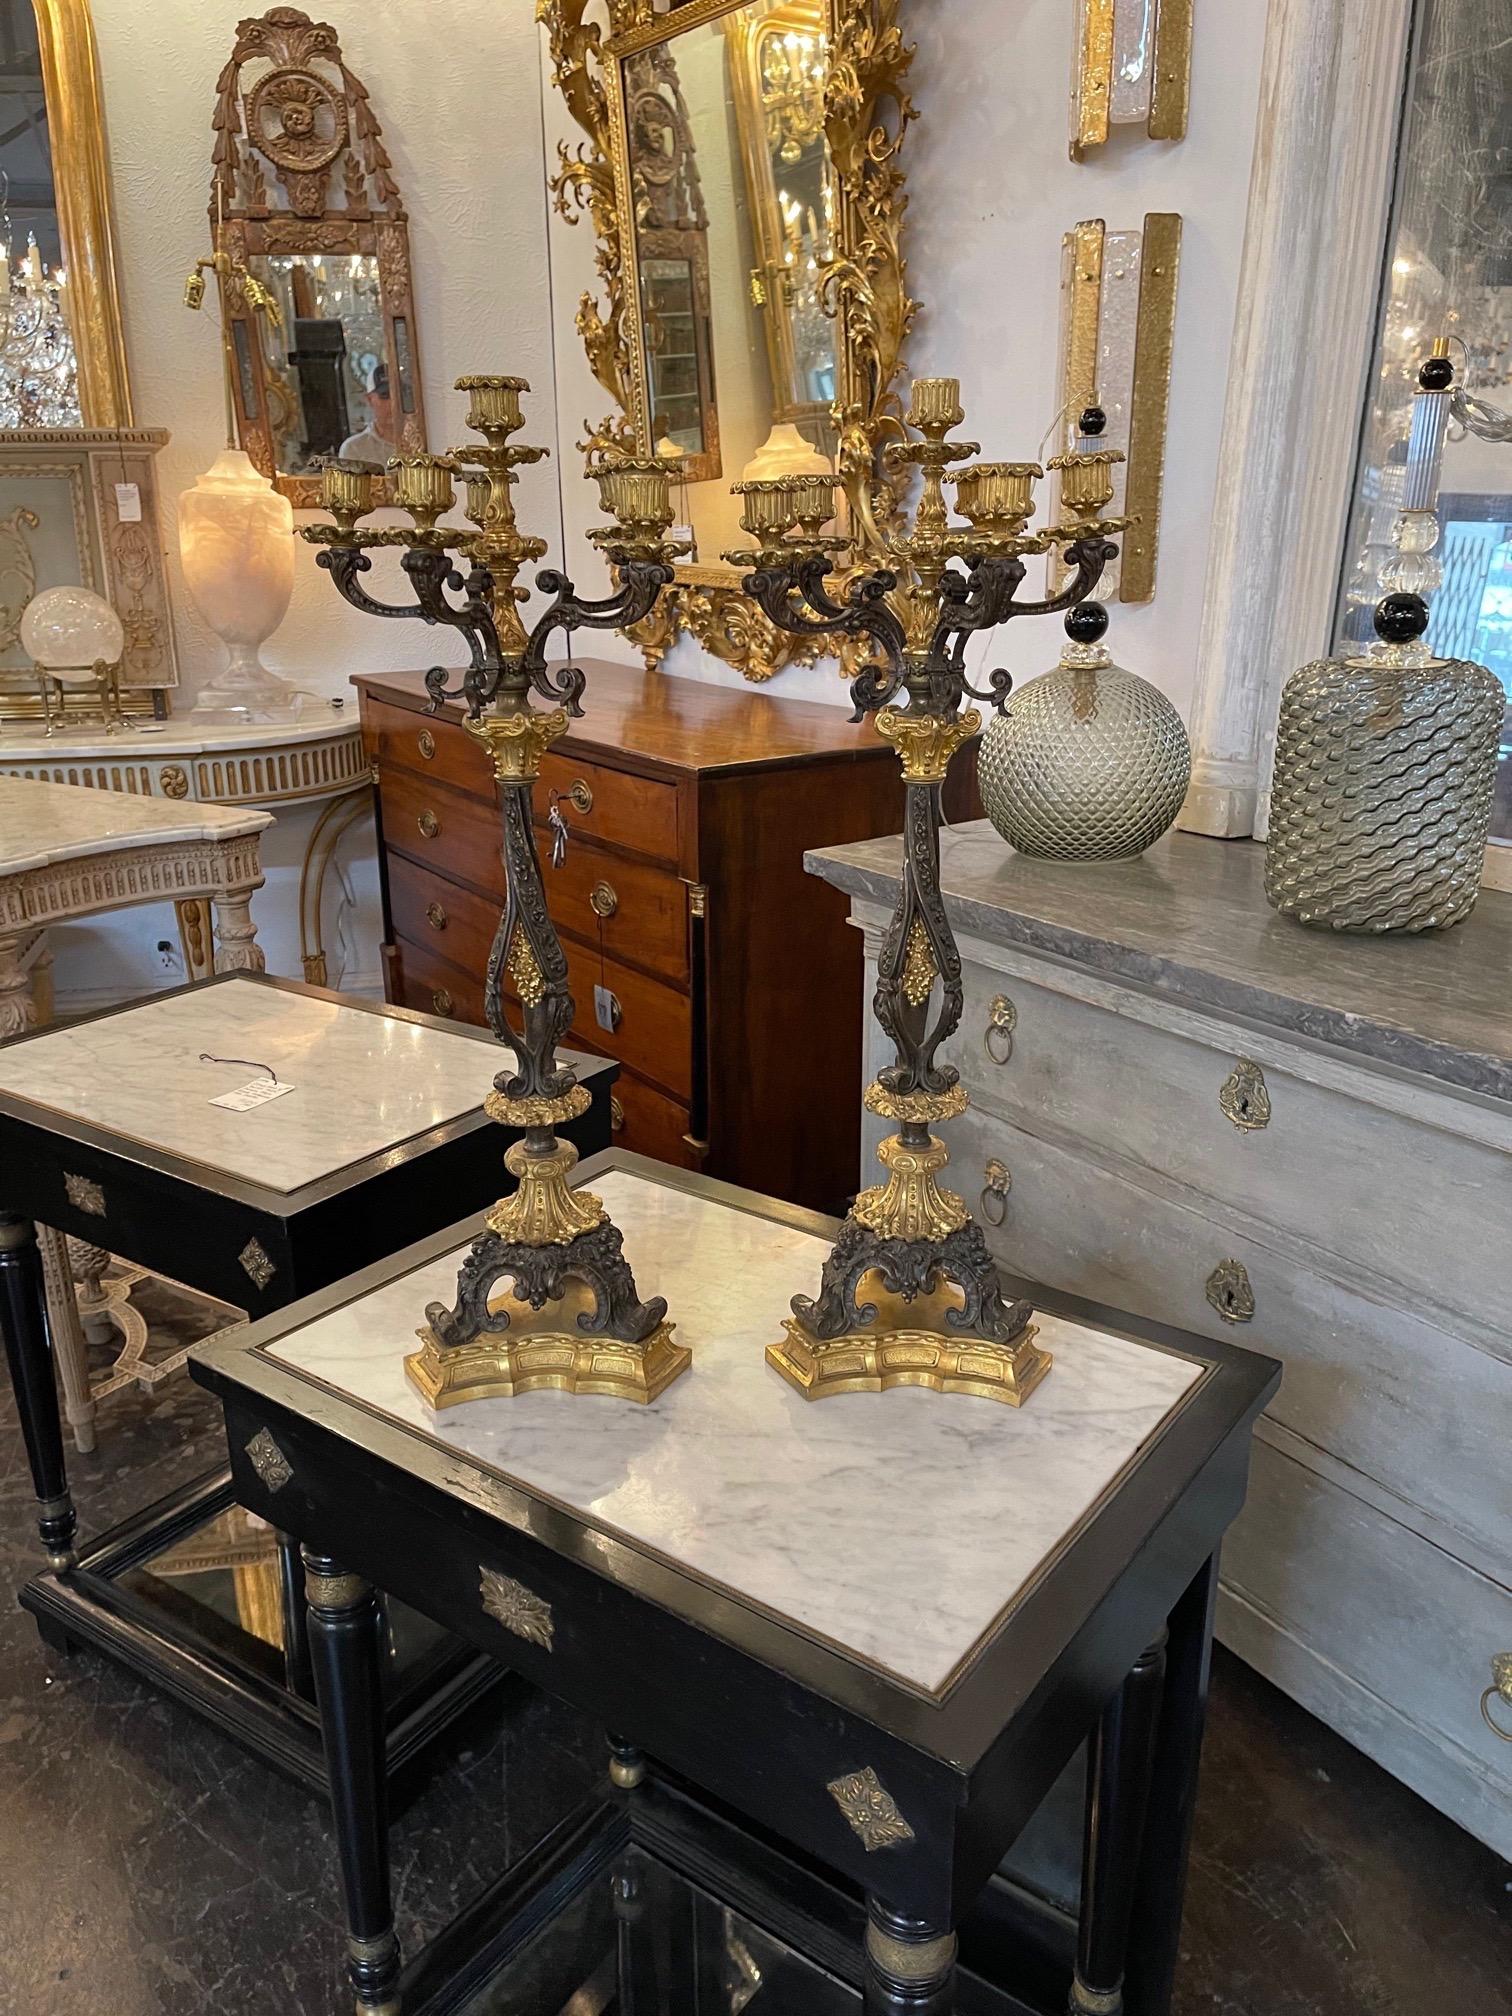 Exquisite pair of 19th century French Empire gilt bronze candelabras with 6-light. Very fine quality. Super impressive!